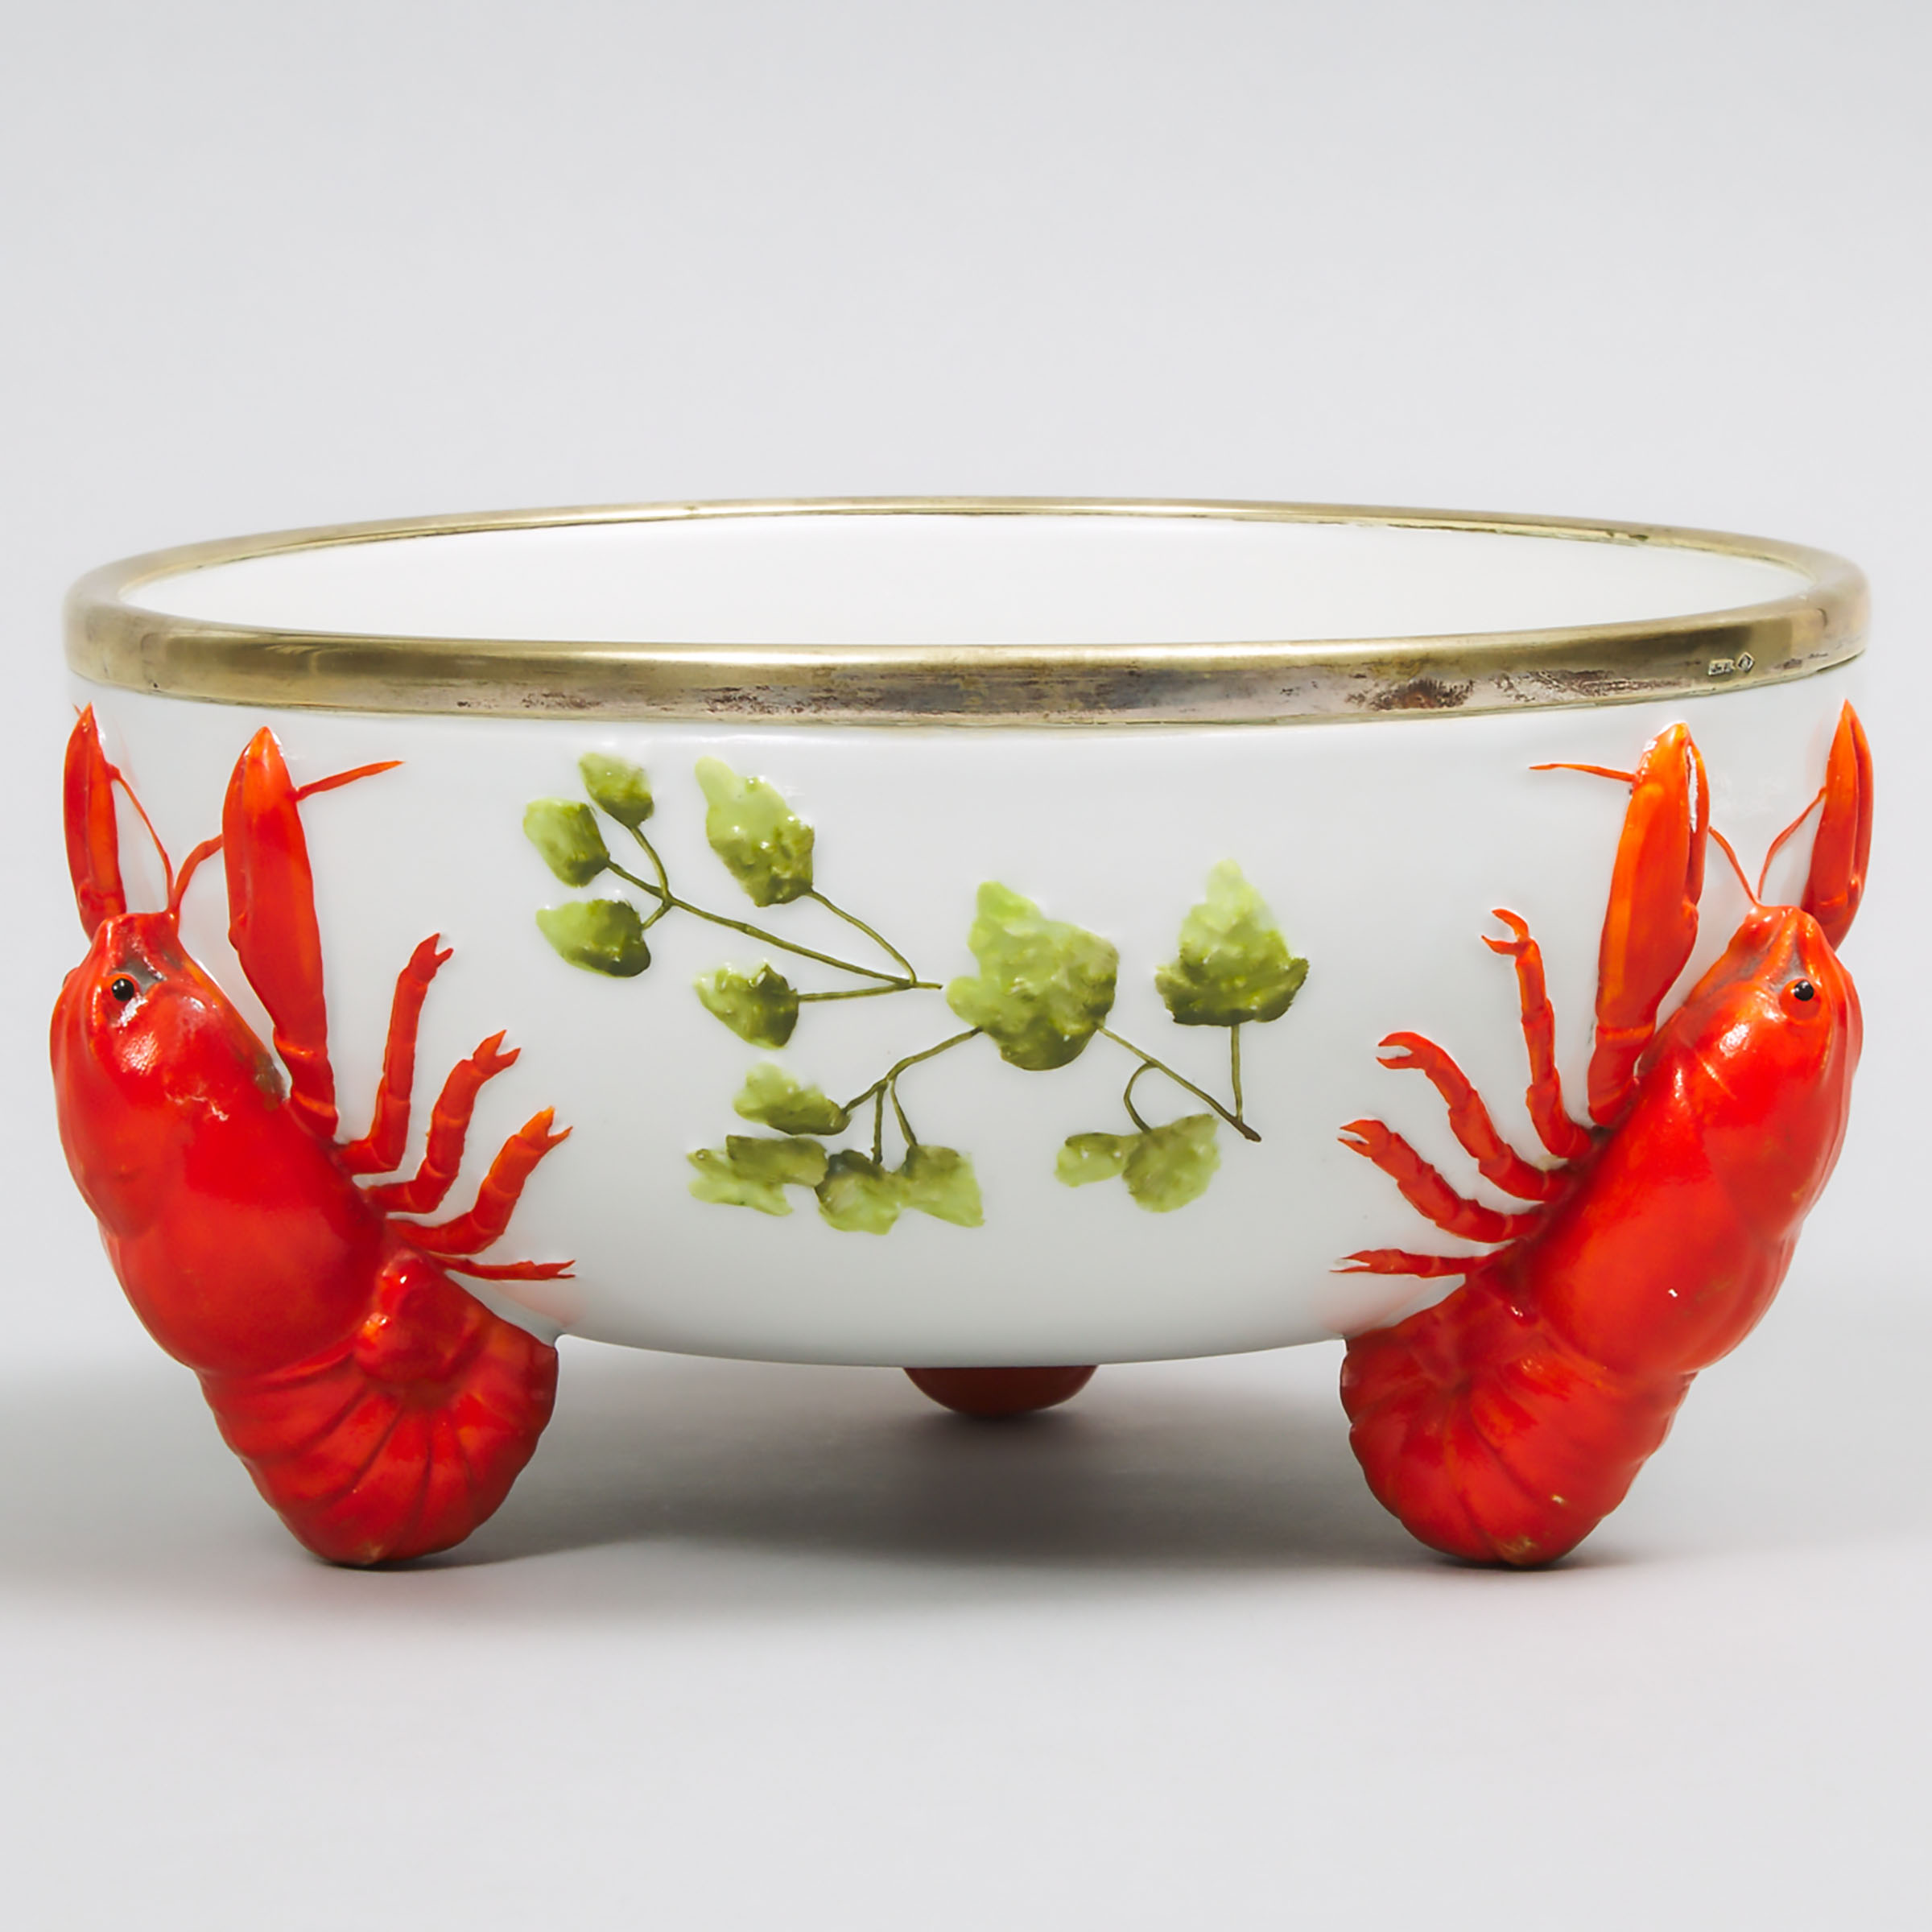 German Silvered Metal Mounted Porcelain Lobster Salad Bowl, early 20th century